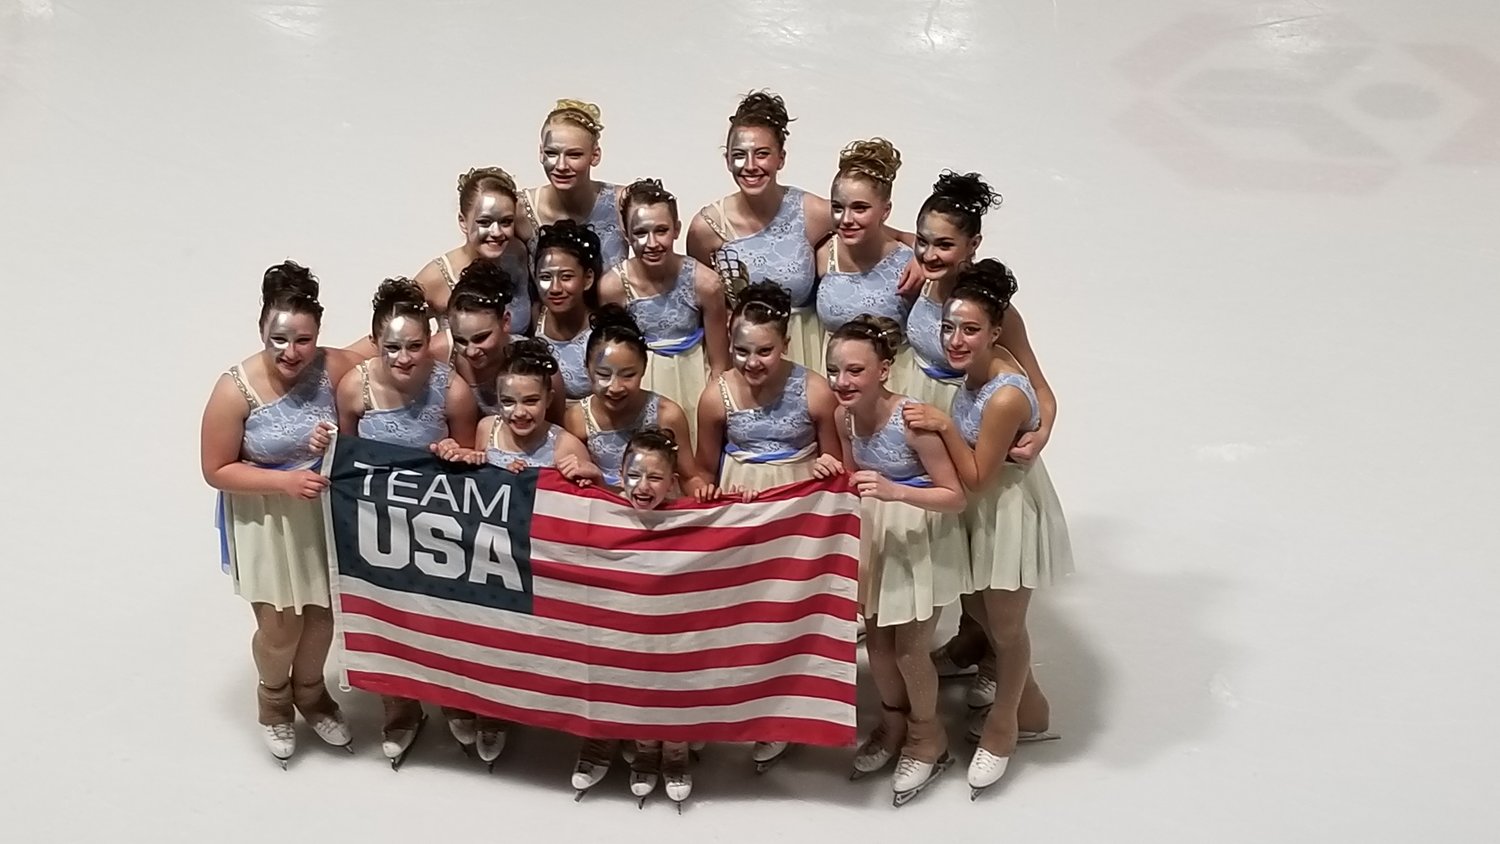 Members of the Ocean State Ice Theatre team celebrate their recent second place finish at Nation's Cup.